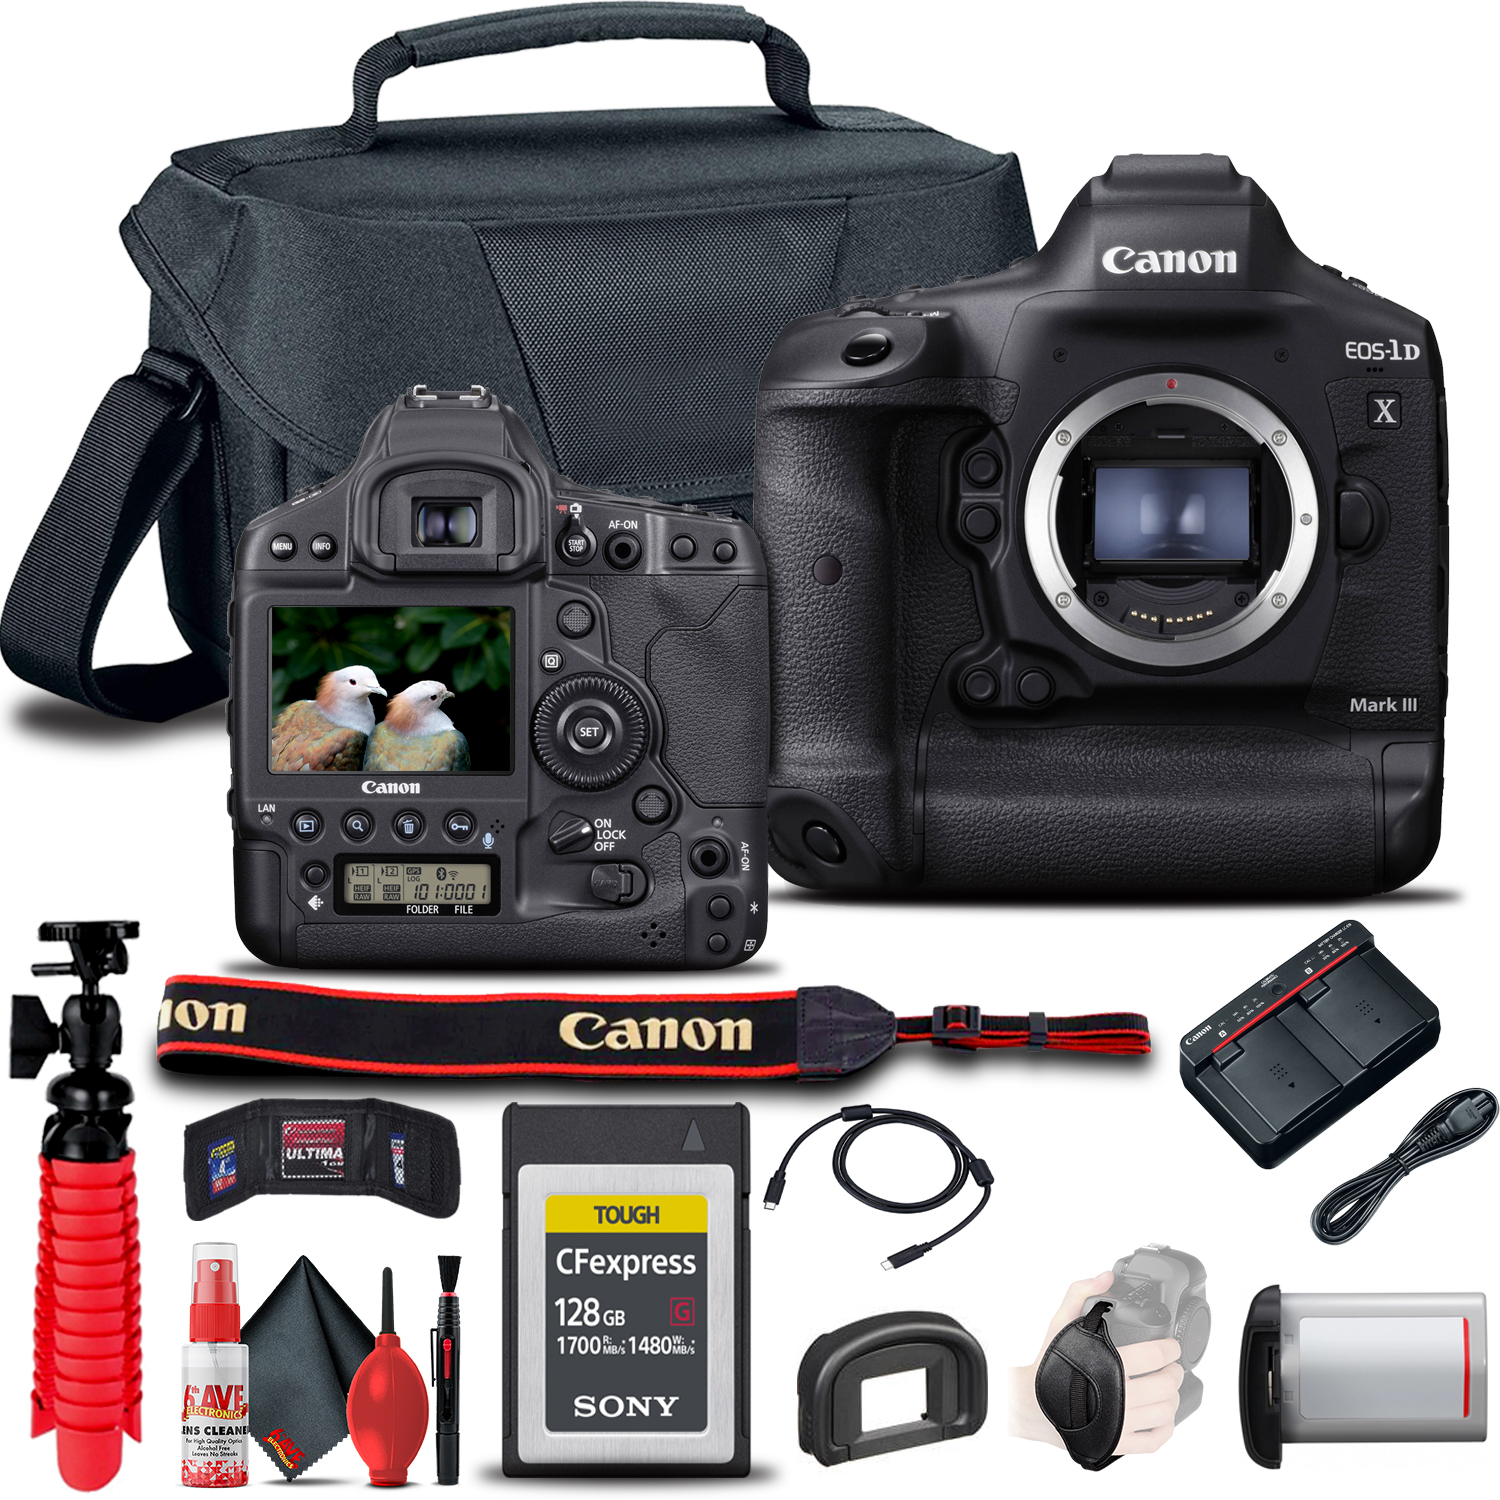 Canon EOS-1D X Mark III DSLR Camera (Body Only) (3829C002) + 128GB  Card - image 1 of 8